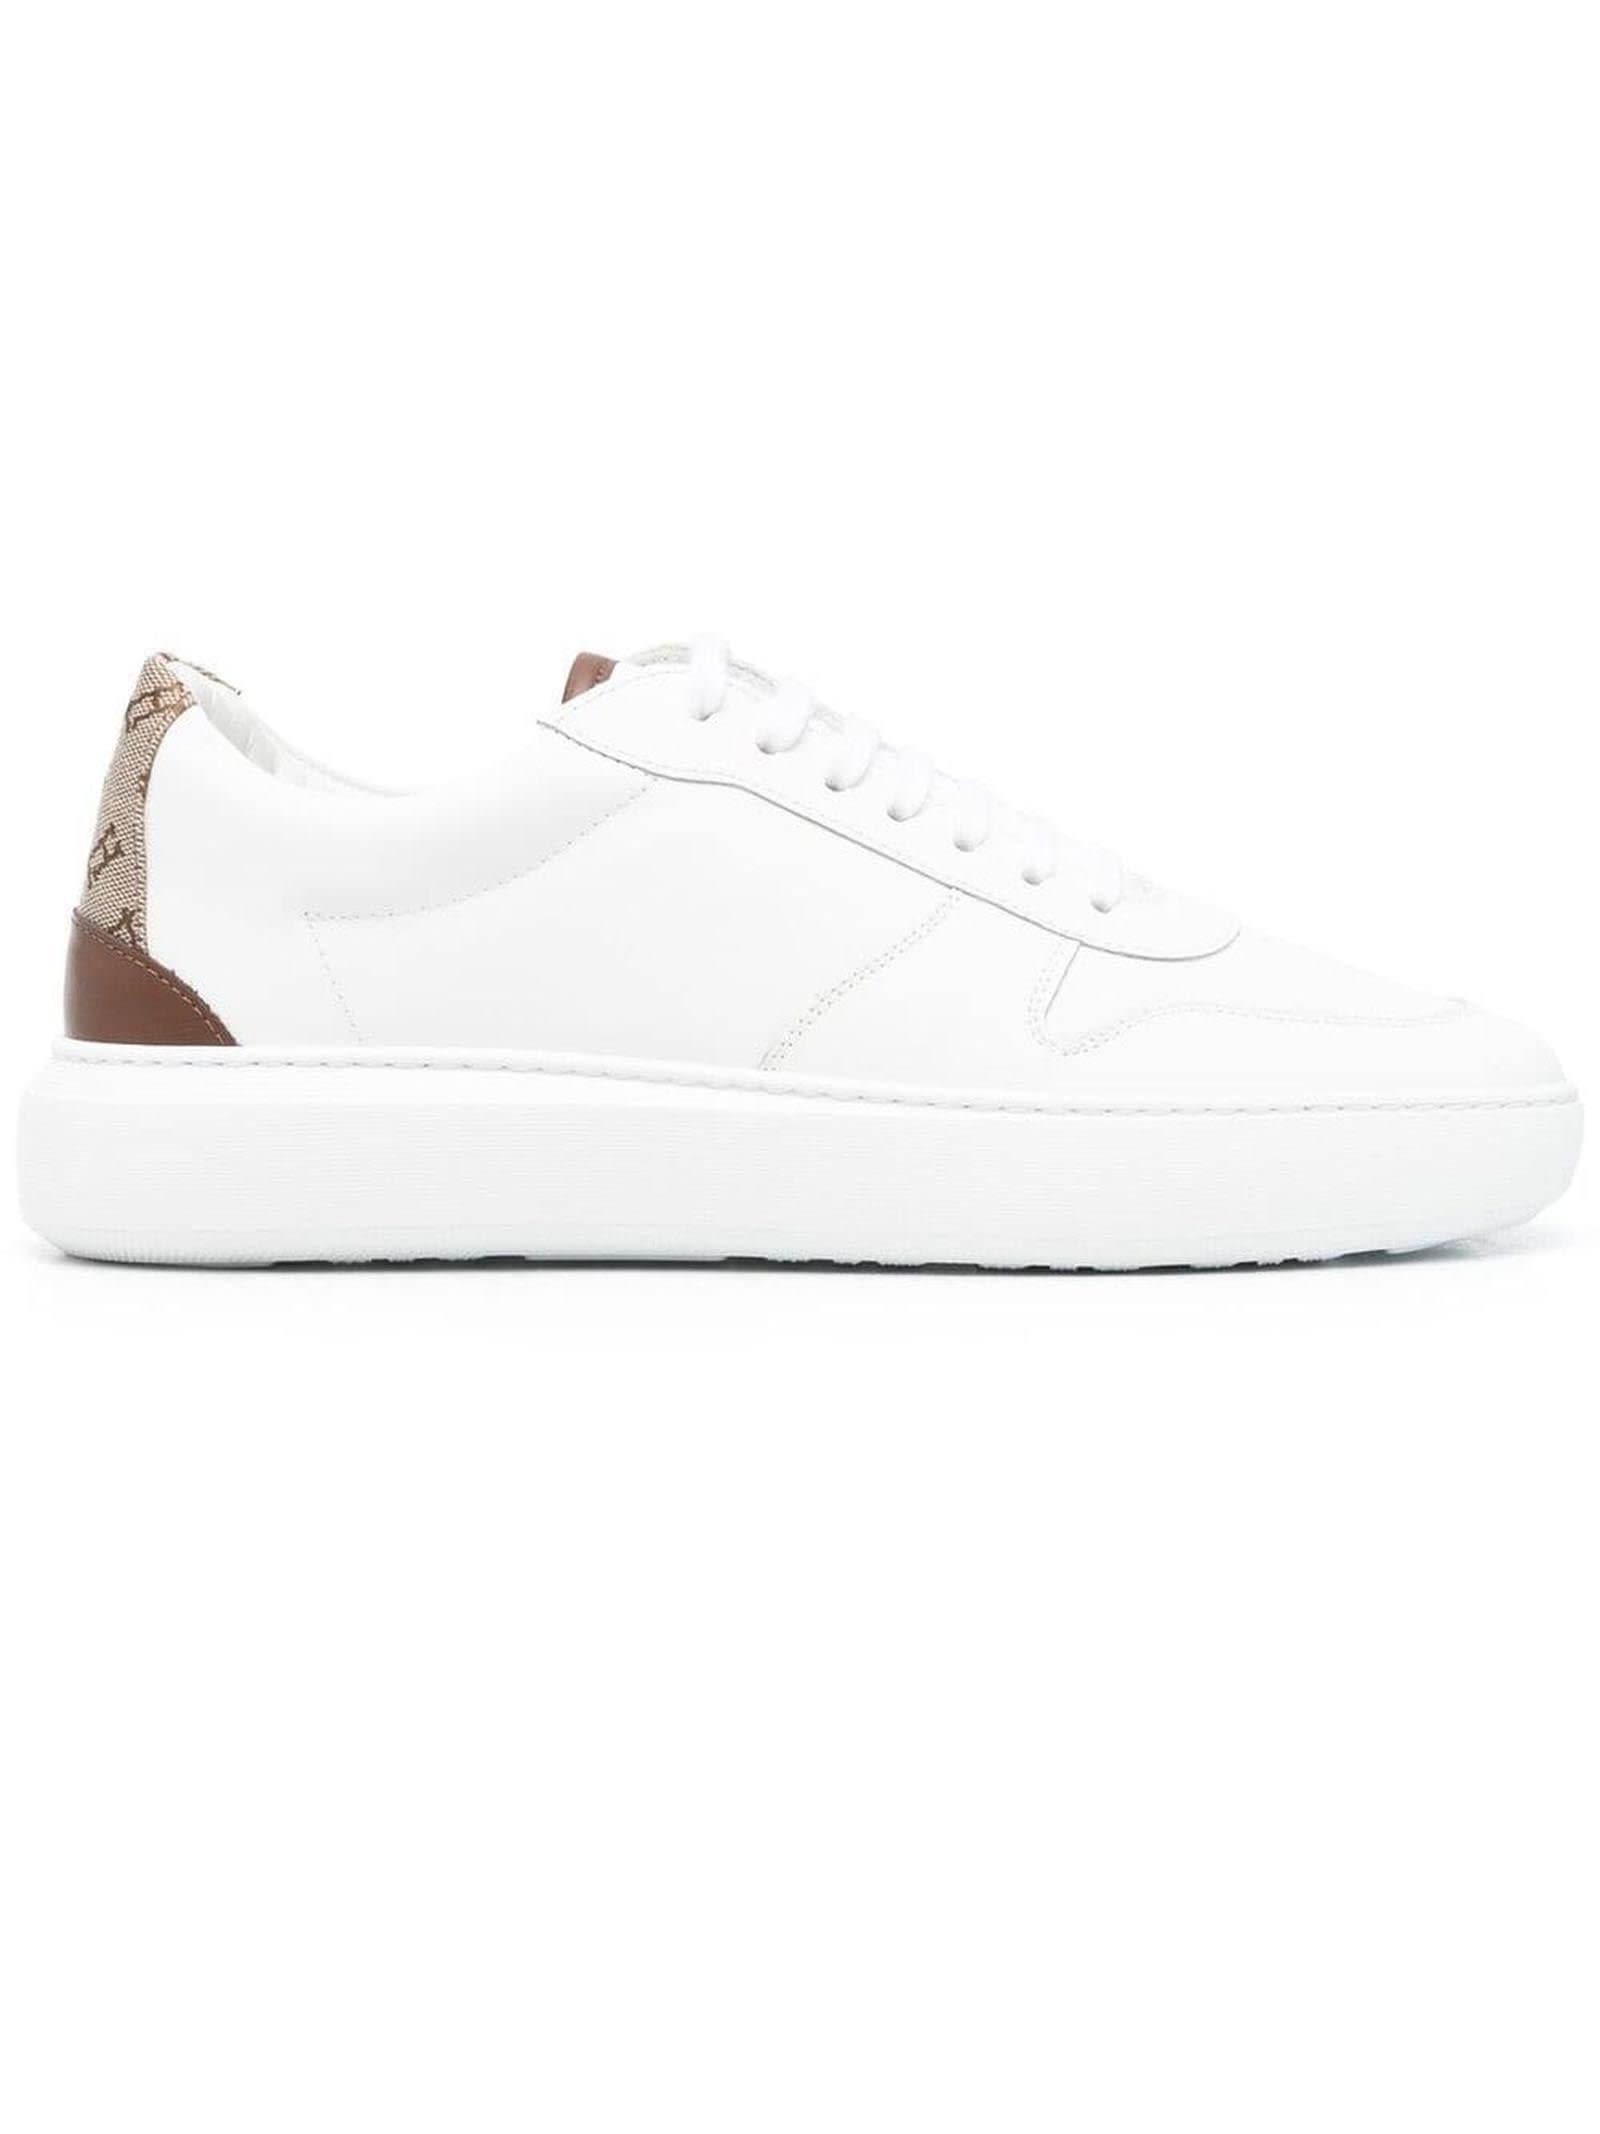 Herno White Calf Leather Sneakers